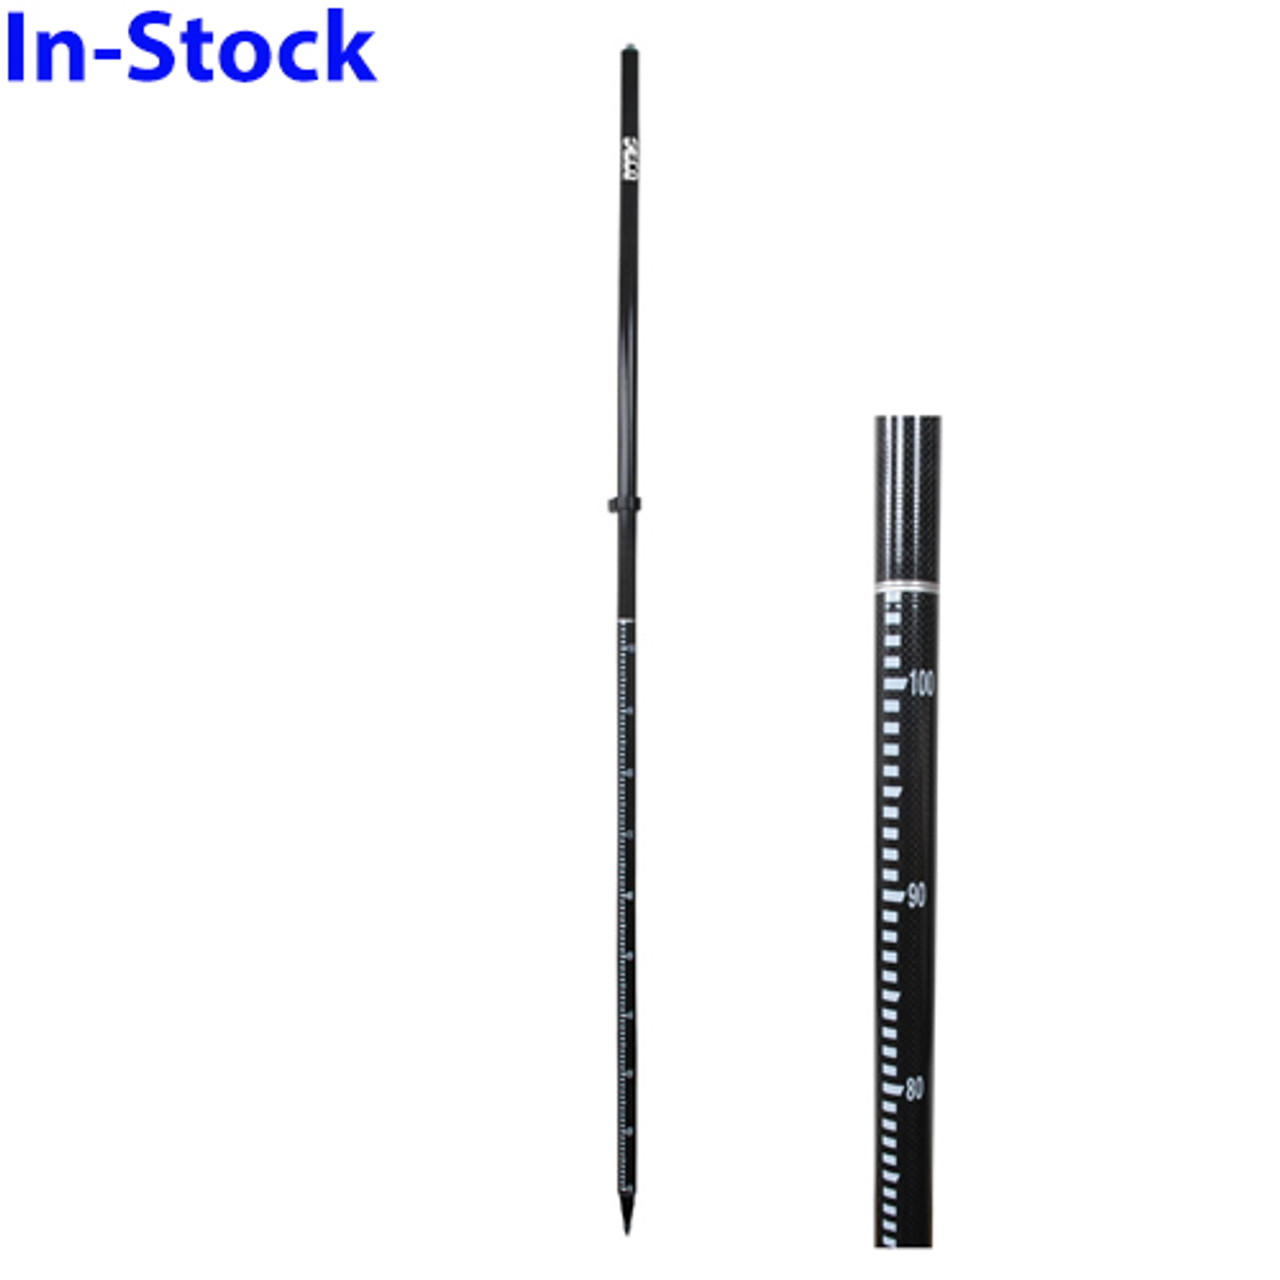 SECO 2 m Snap-Lock Rover Rod with Outer “GT” Grad (5128-00-GT)